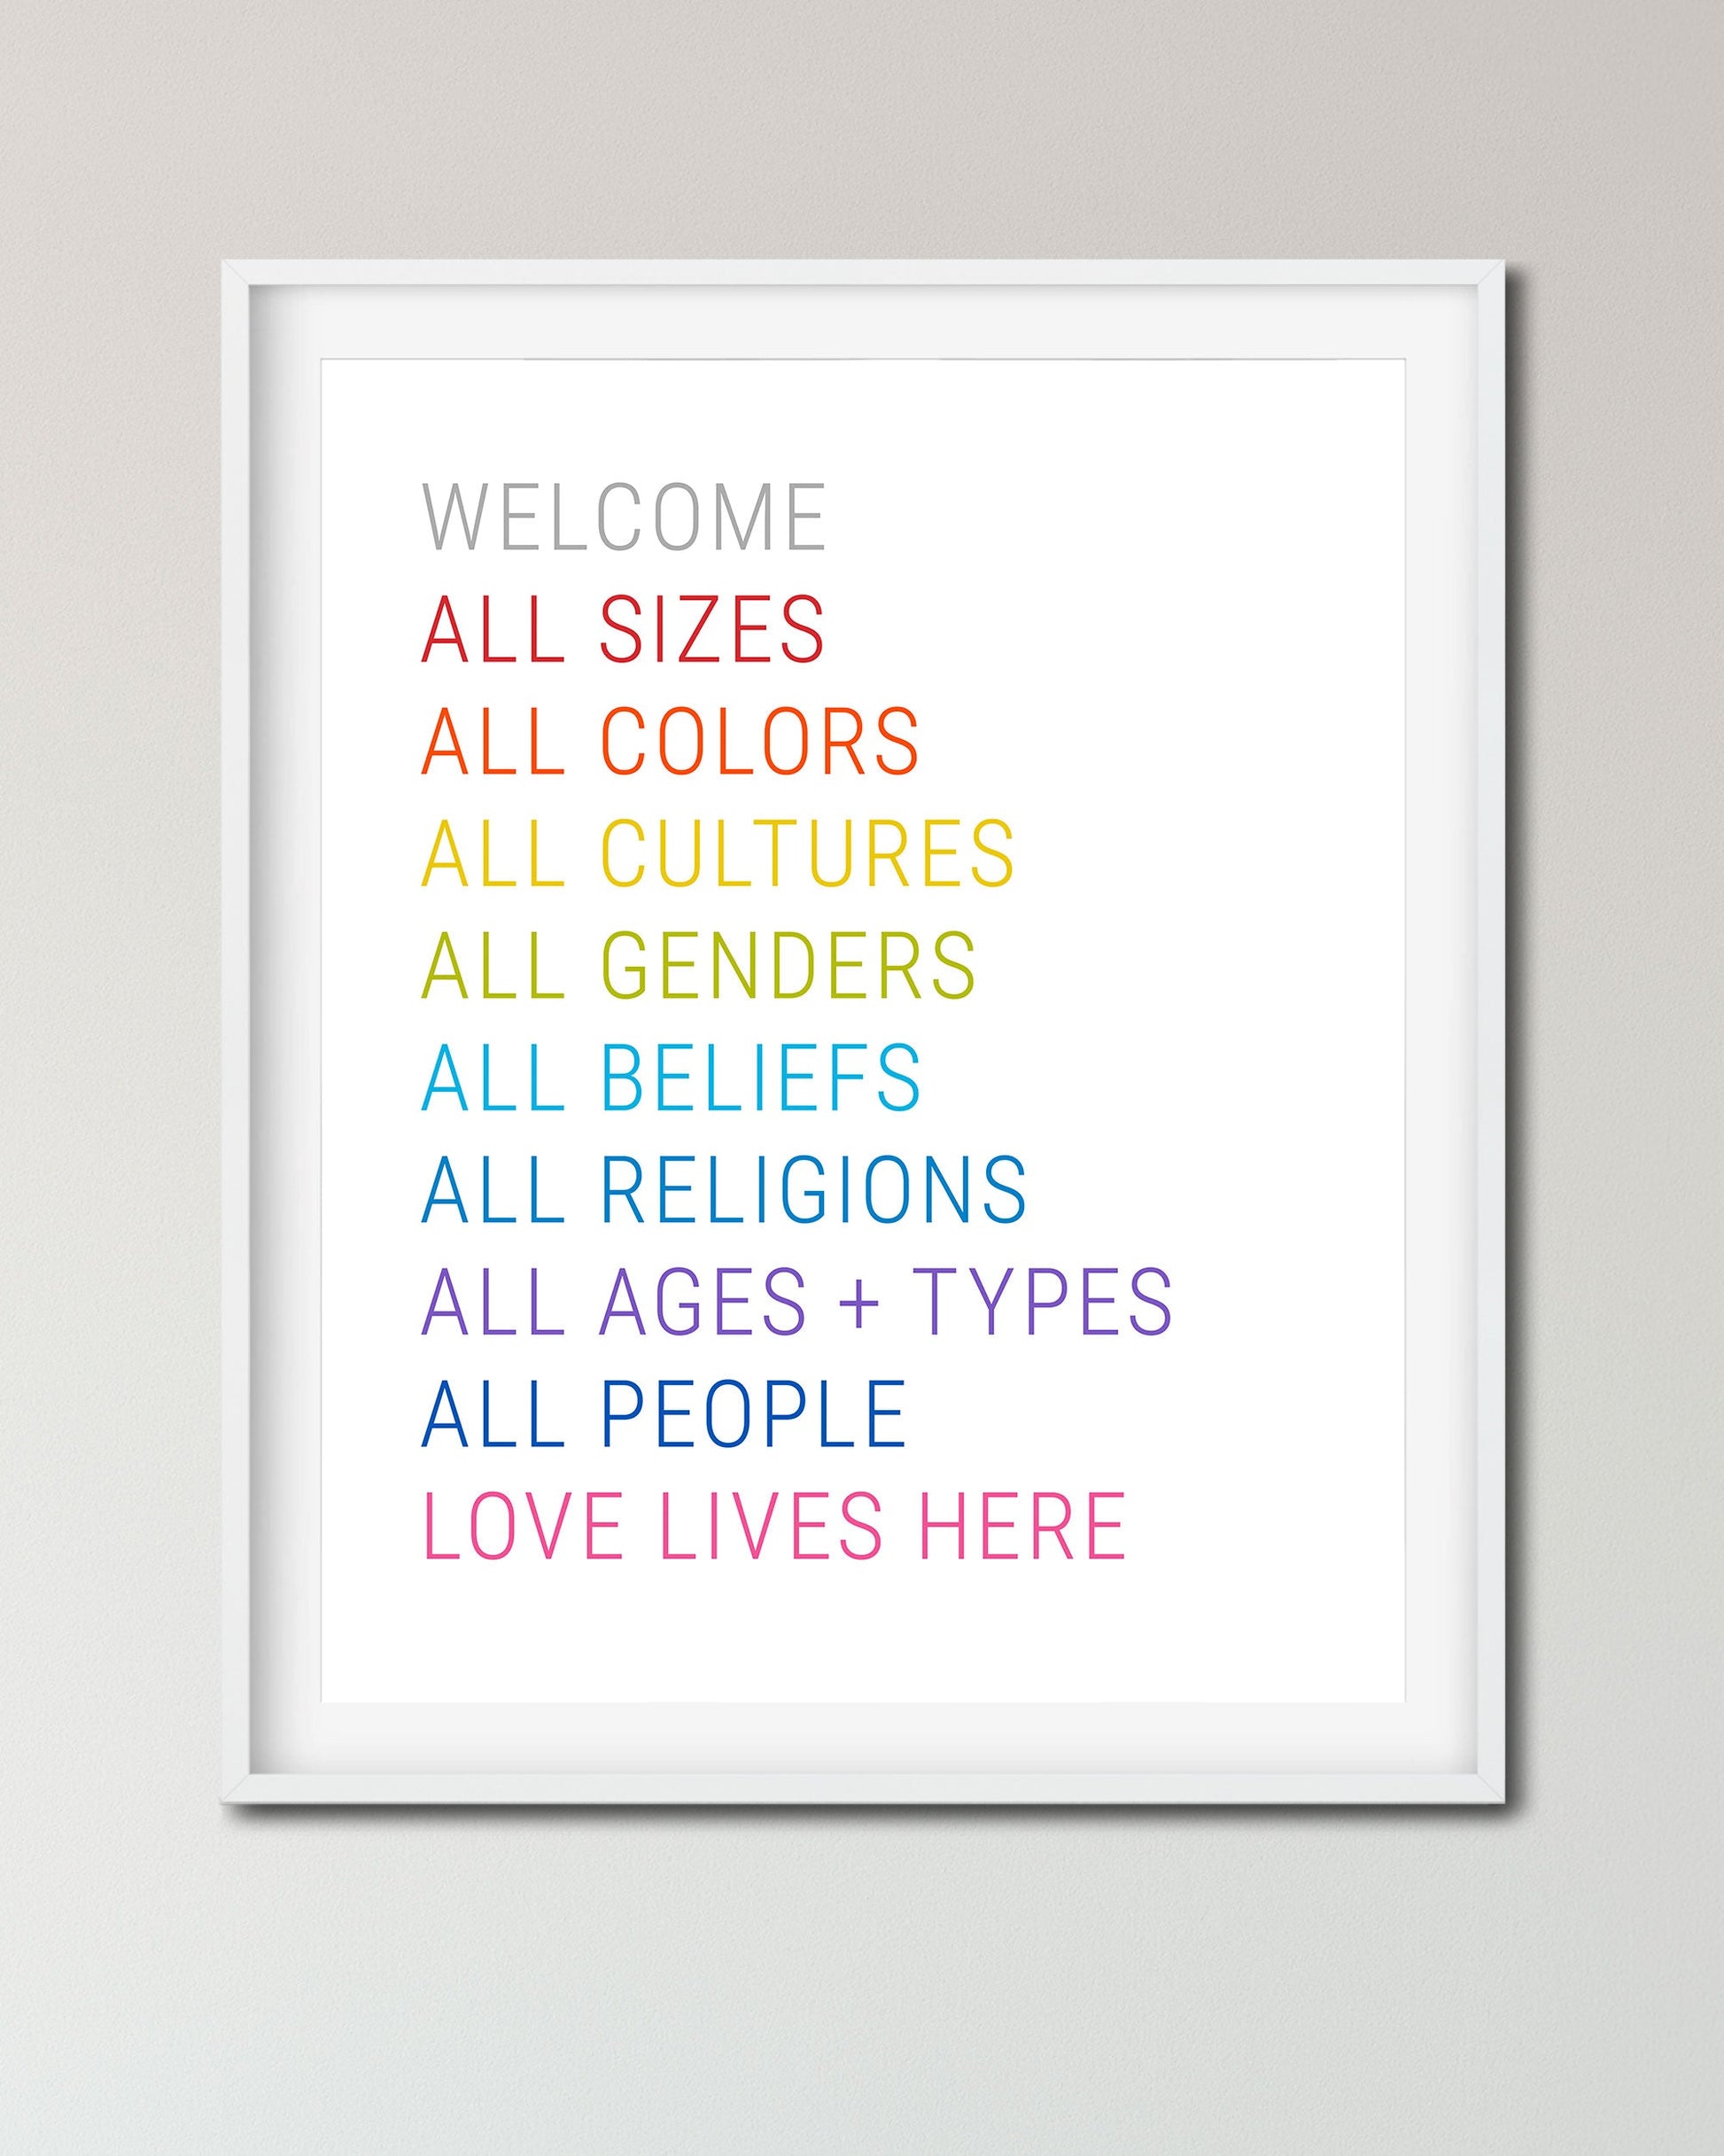 All Are Welcome Equality Print - Transit Design - Transit Design